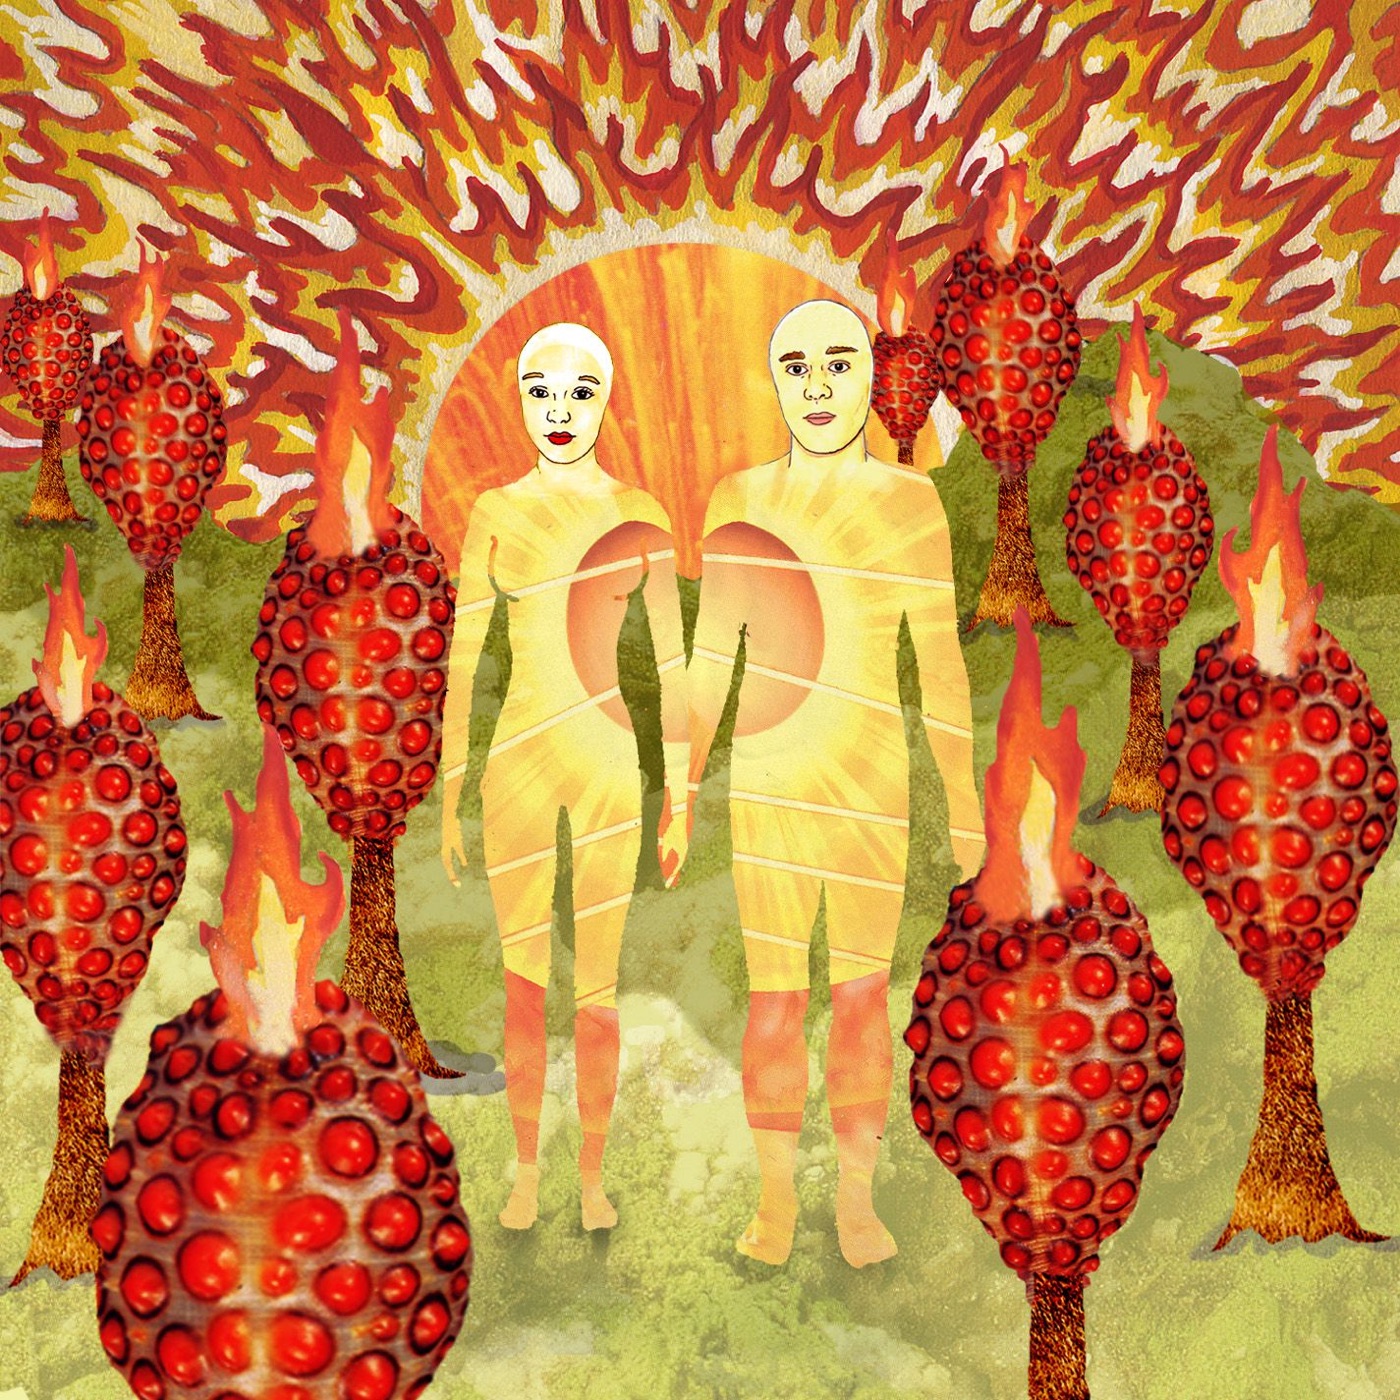 The Sunlandic Twins by of Montreal